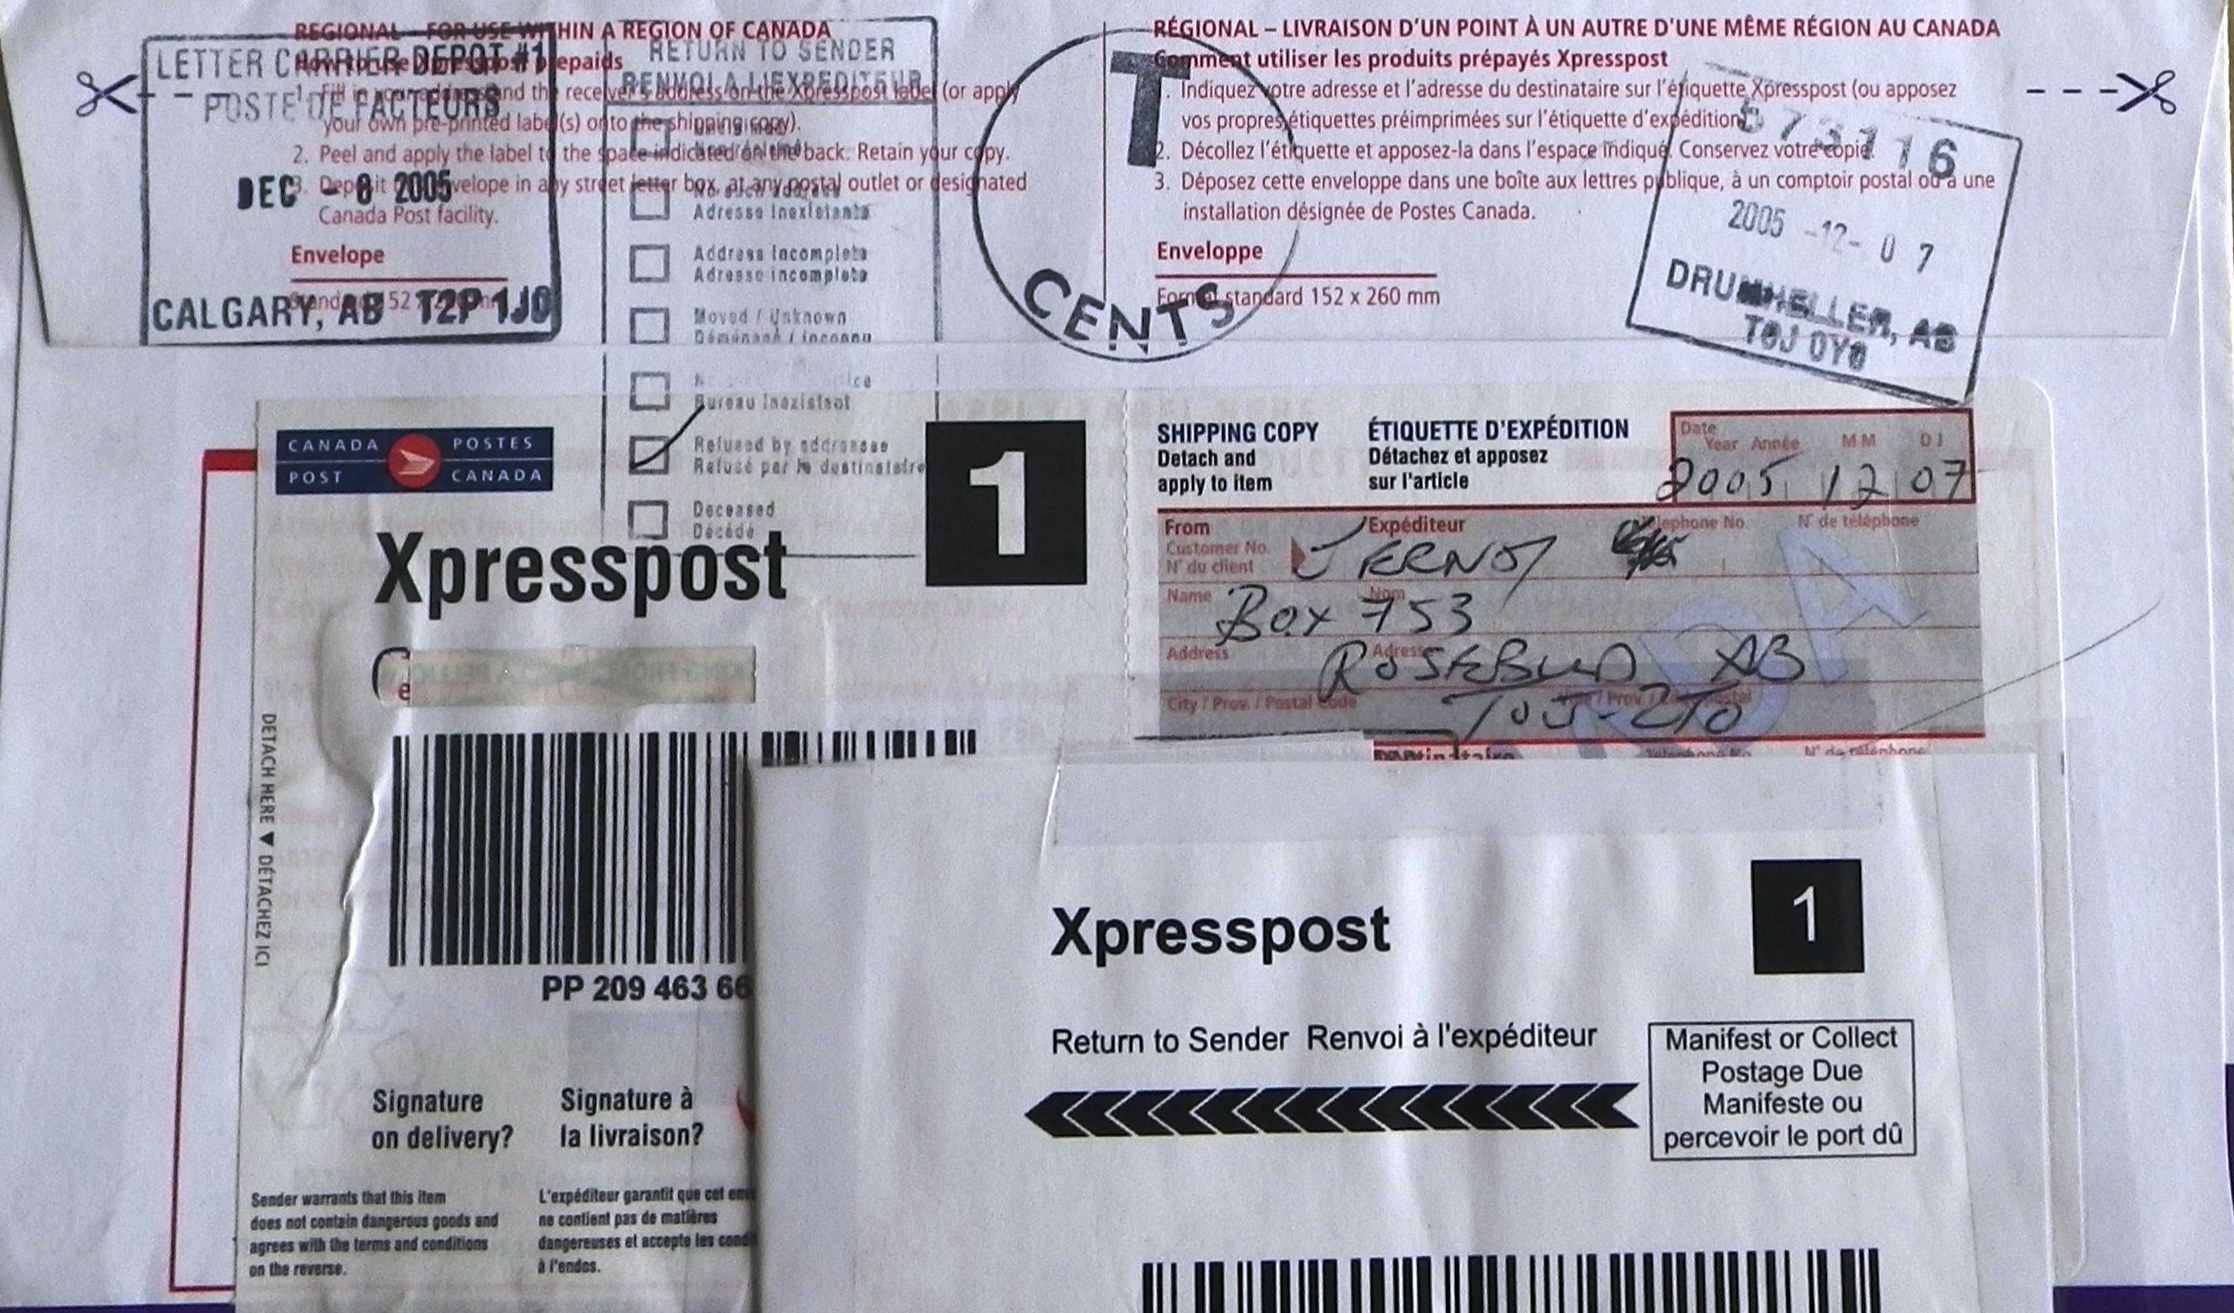 2005 12 back XPRESSPOST stamped refused by addressee contains (EUB) Ernst letter to EUB asking clarication re banishment